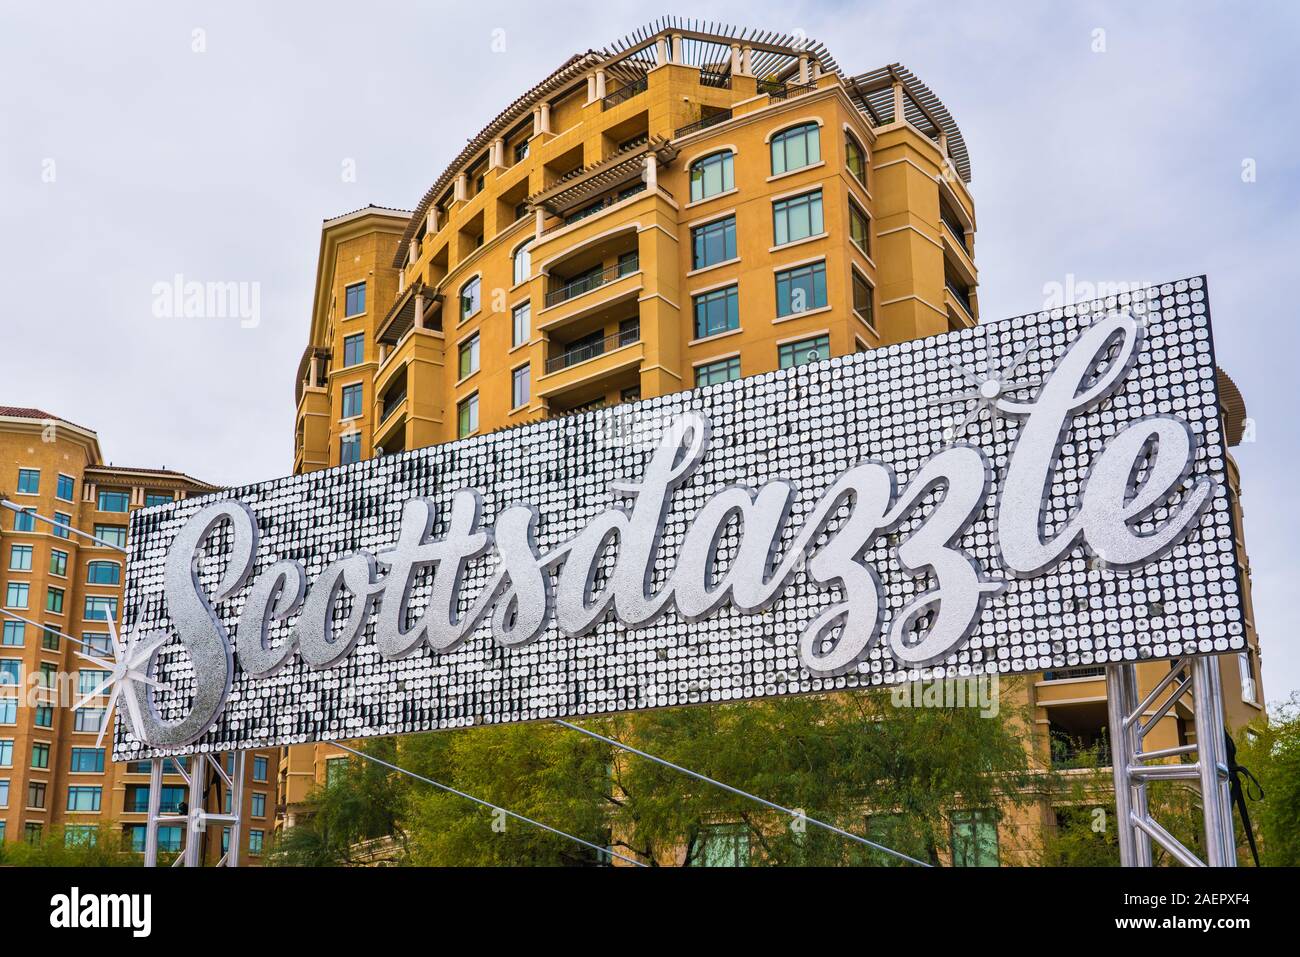 Scottsdale, AZ - Dec. 3, 2019:  This Scottsdazzle sign at the waterfront’s Soleri Bridge is part of the annual holiday event taking place throughout t Stock Photo